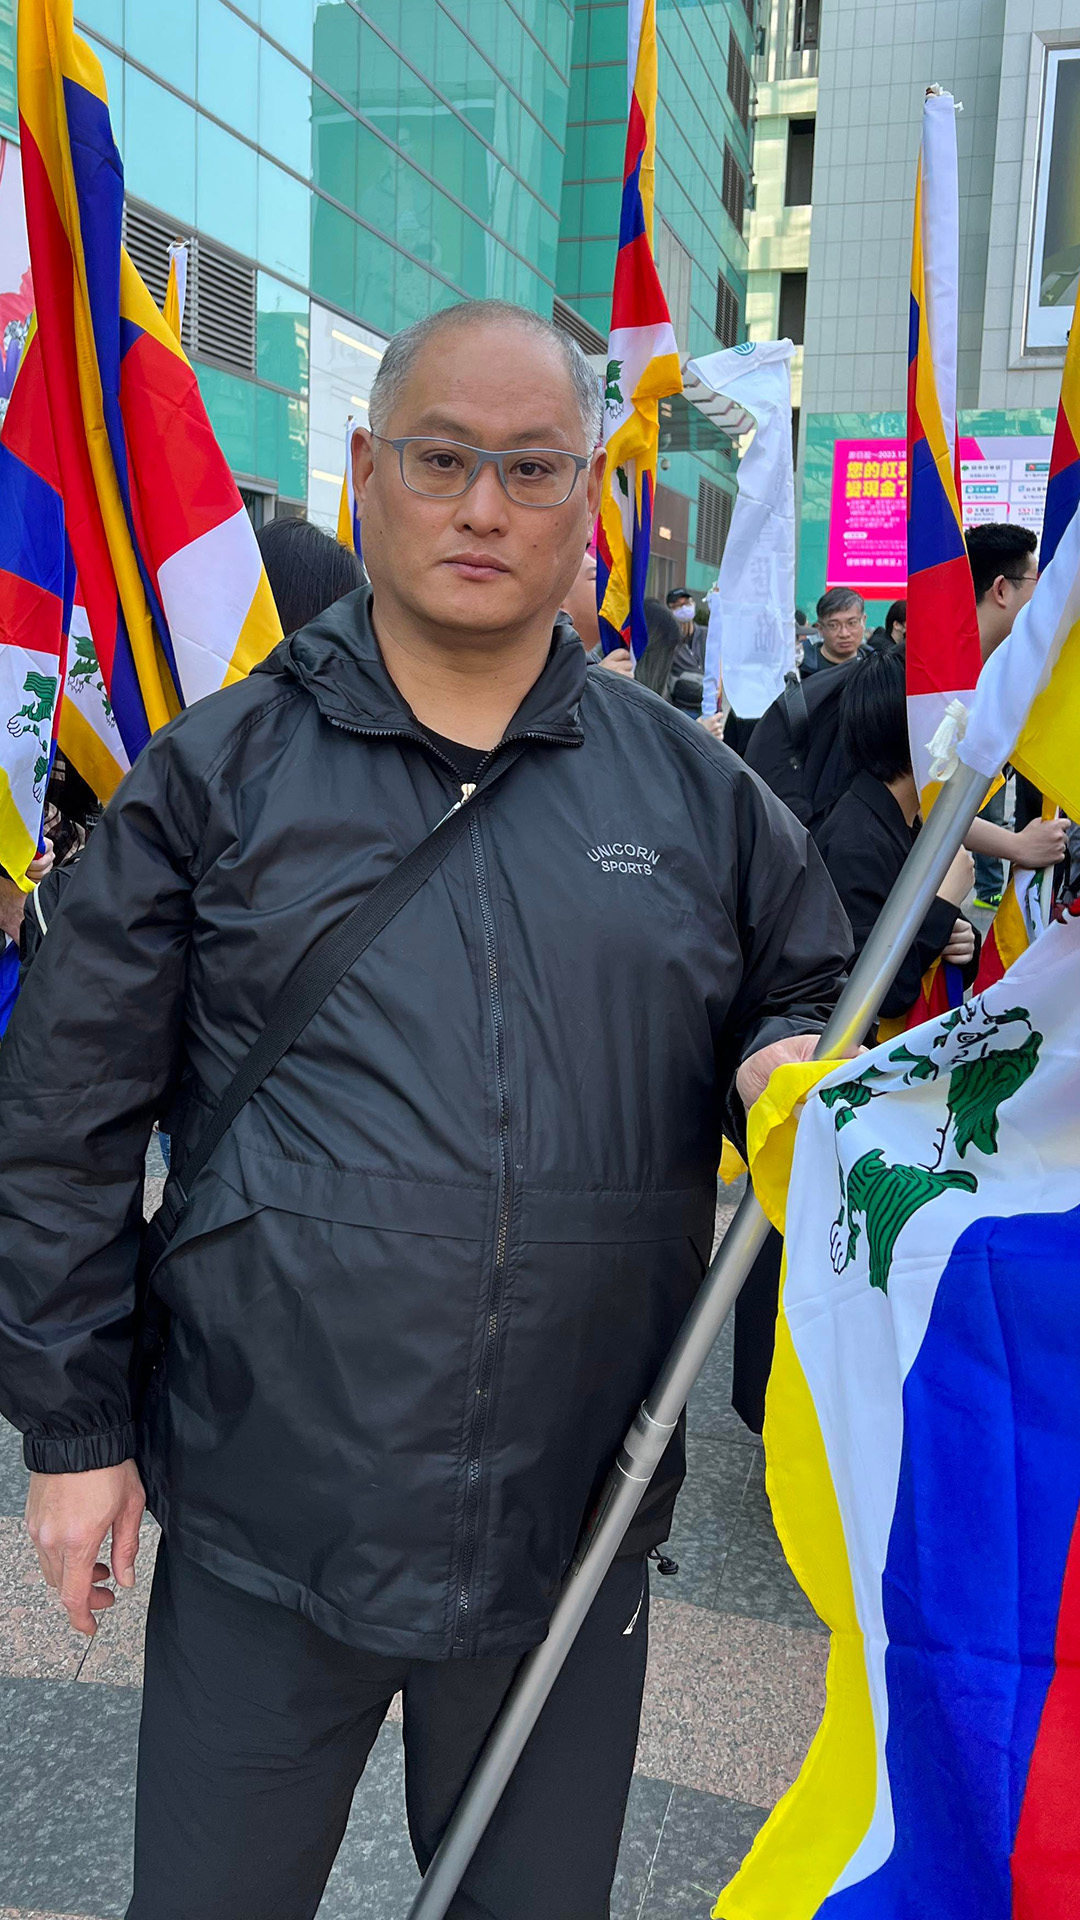 Lee Ming-che stands and holds a flag in an outdoor plaza alongside other people holding flags, with buildings in the background.